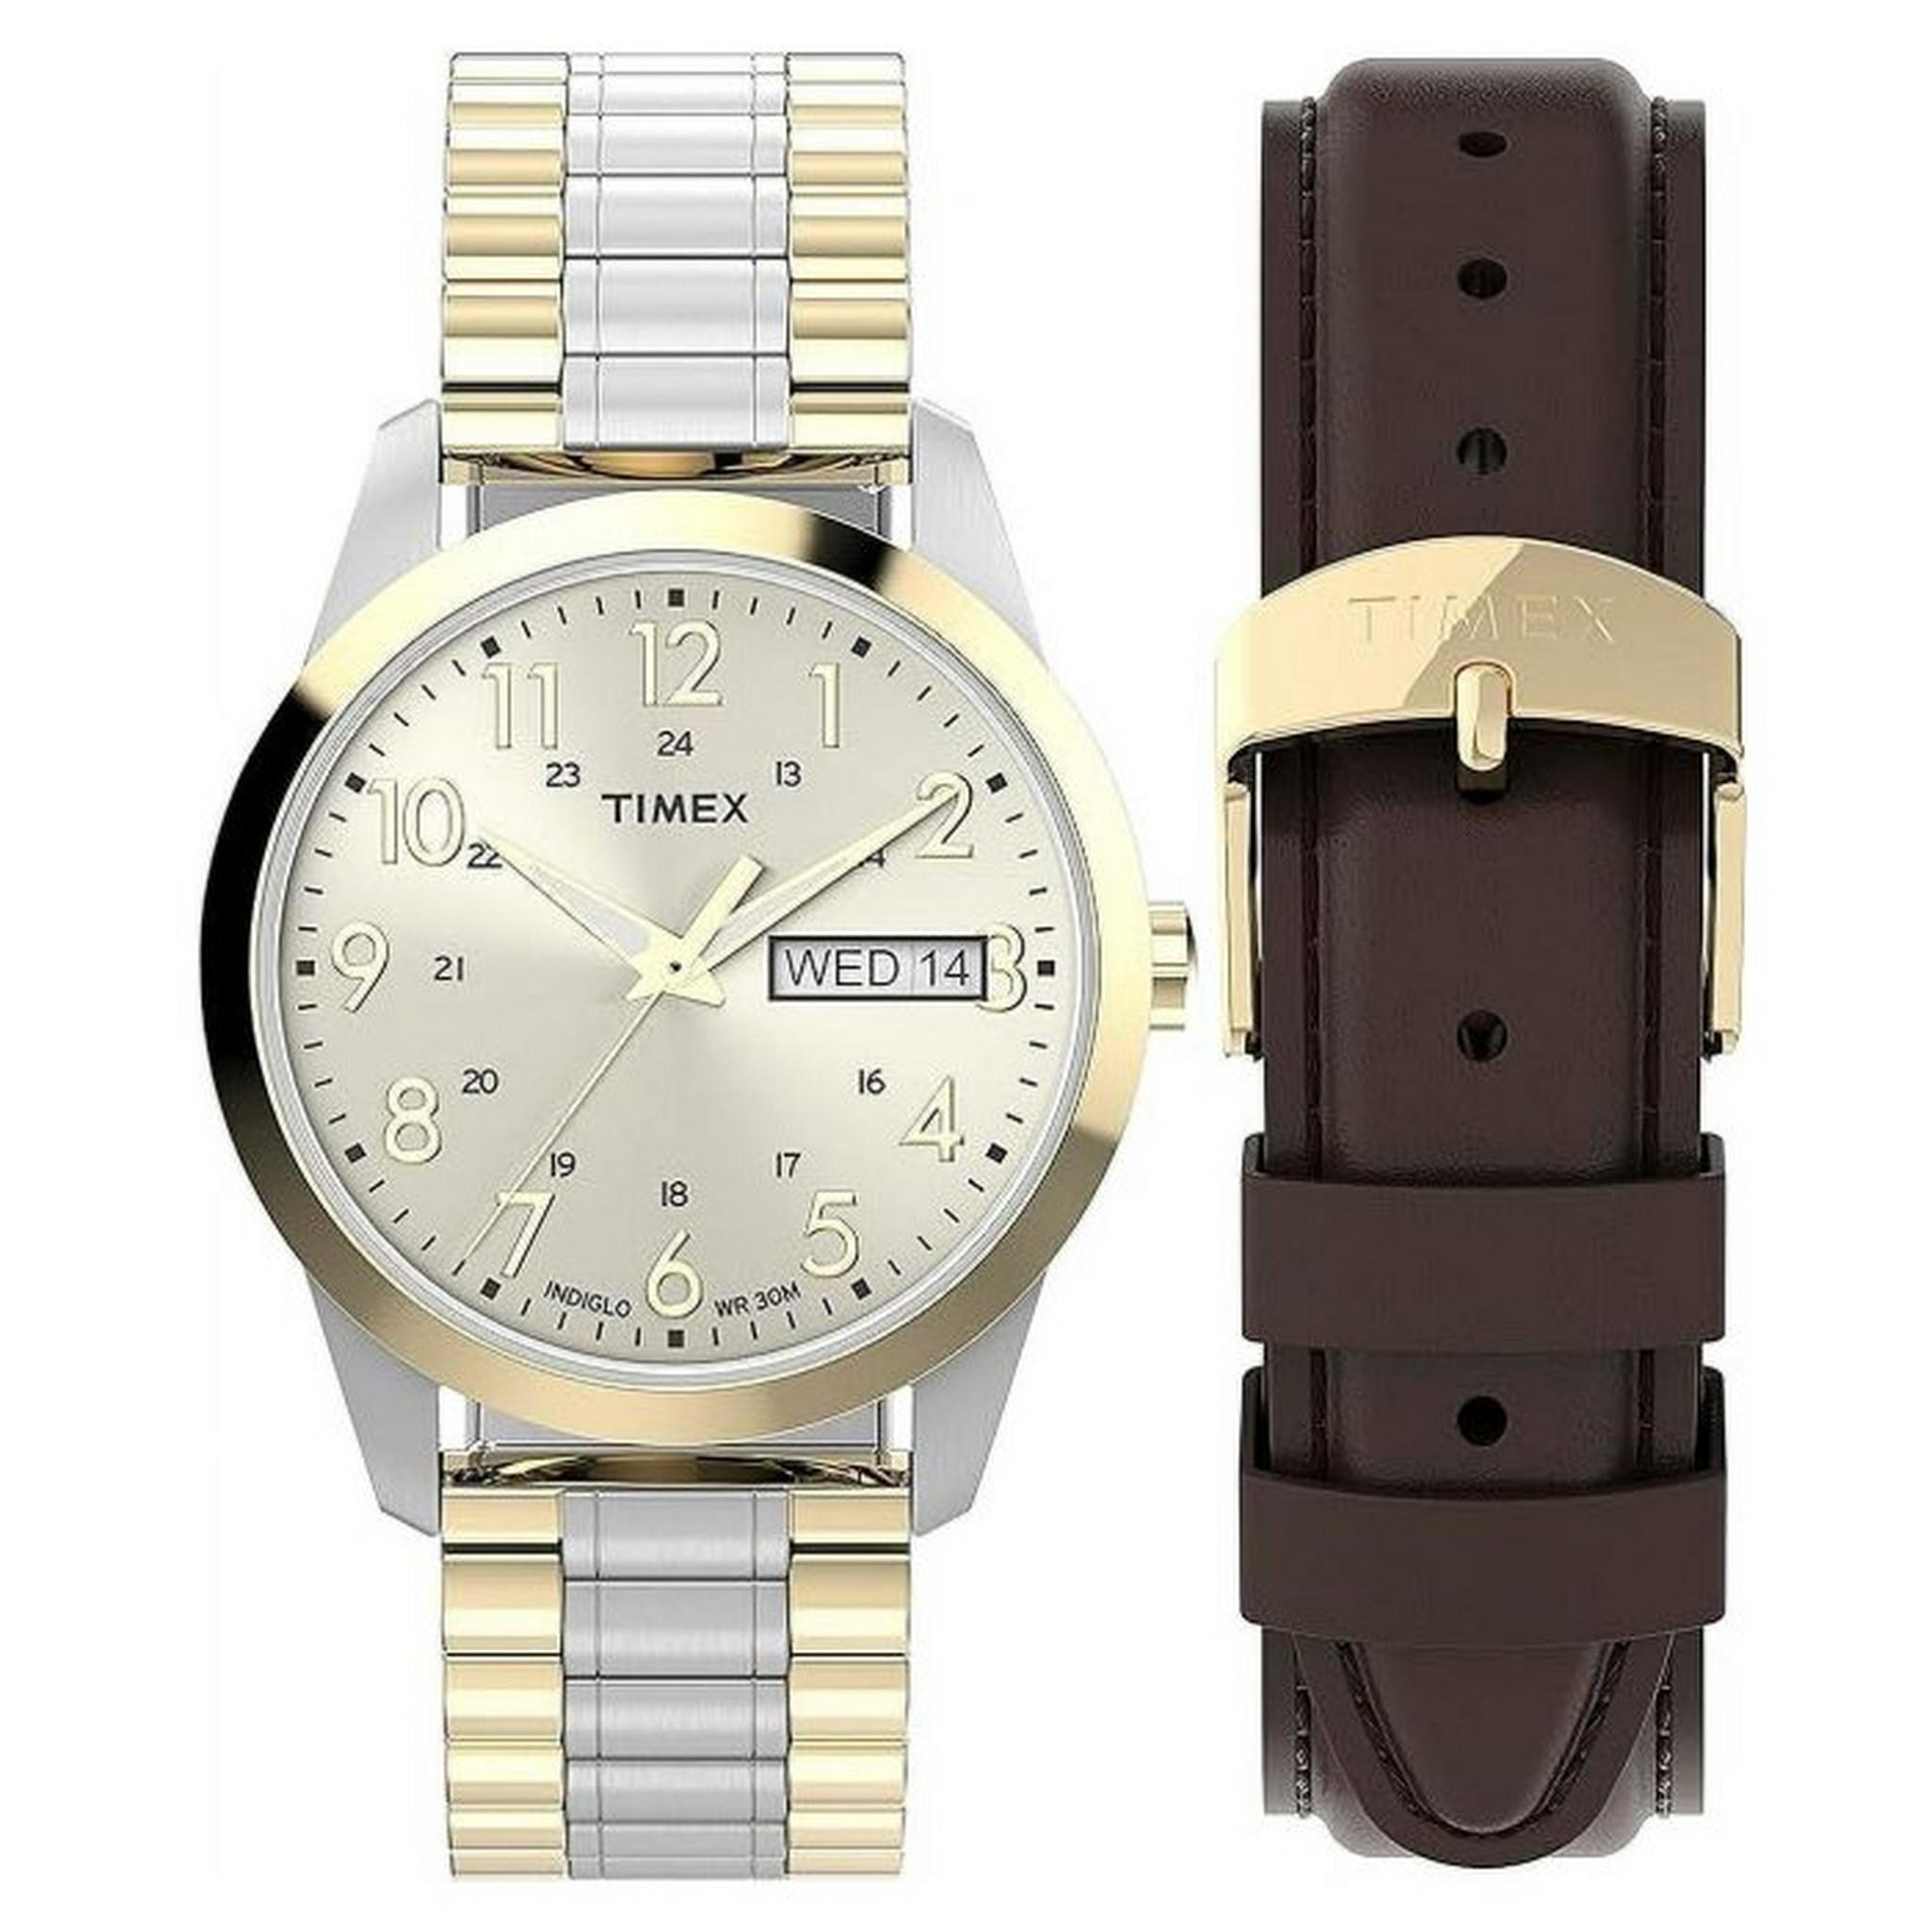 Timex South Street Sport Watch Gift Set for Men, Analog, 36mm, Stainless Steel Strap + Extra Leather Strap, TWG0636006V – Silver&Gold